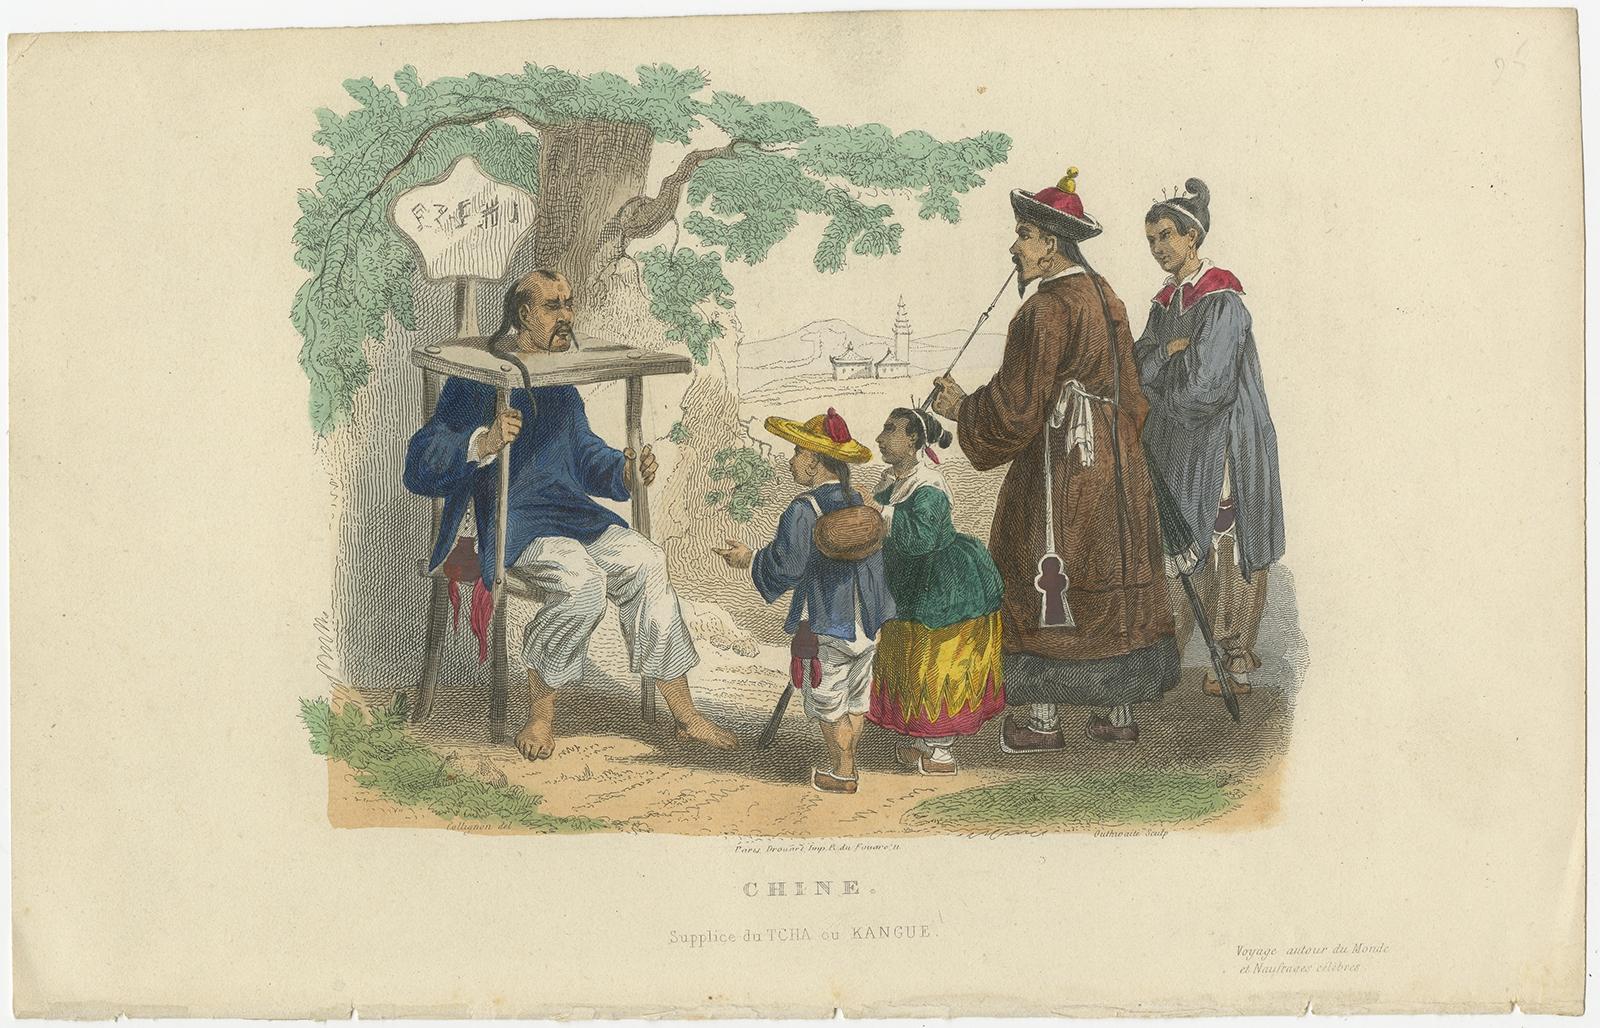 Antique print titled 'Chine - Supplice du Tcha ou Kangue'. 

View of corporal punishment with a cangue (or tcha). The cangue is a device that was used for public humiliation and corporal punishment in East Asia and some other parts of Southeast